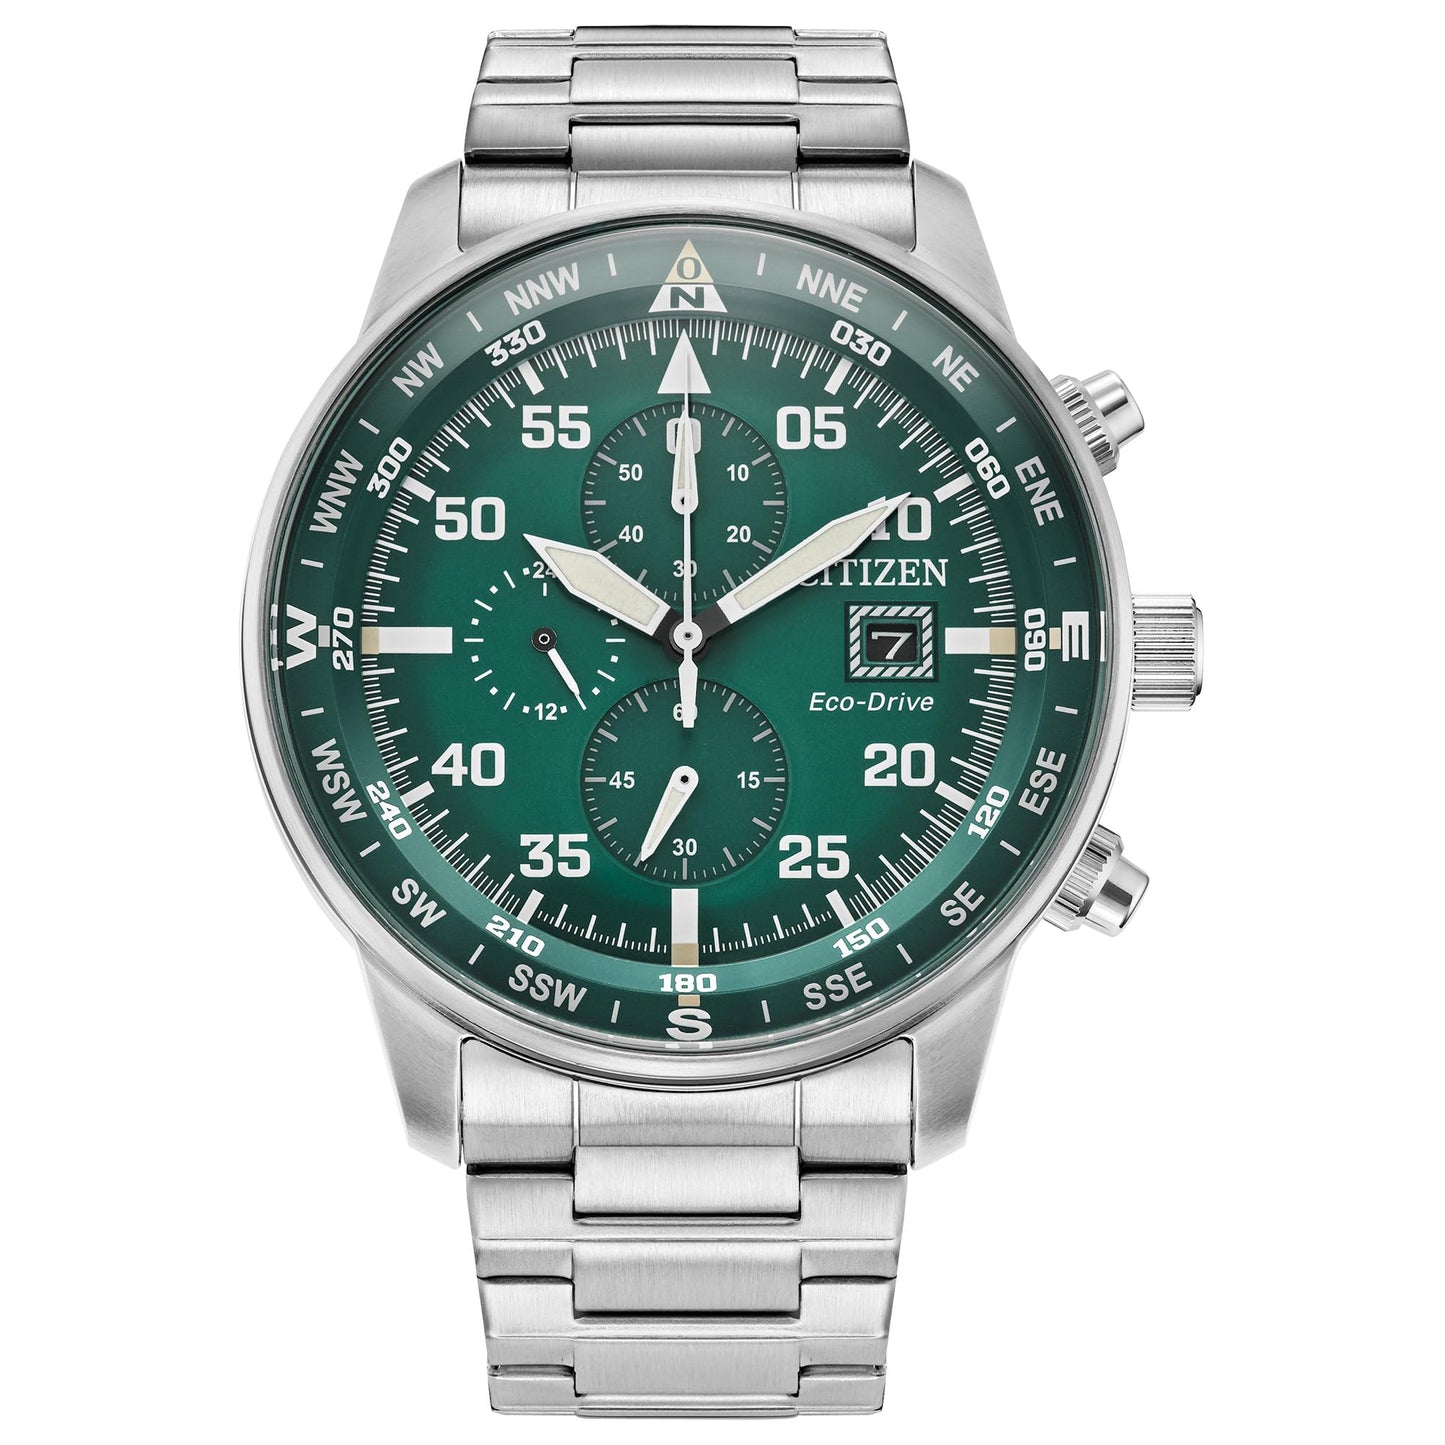 Citizen Men's Eco-Drive Sport Casual Brycen Weekender Chronograph Stainless Steel with Green Dial Watch, 12/24 Hour Time, Date, Luminous Markers, 44mm 